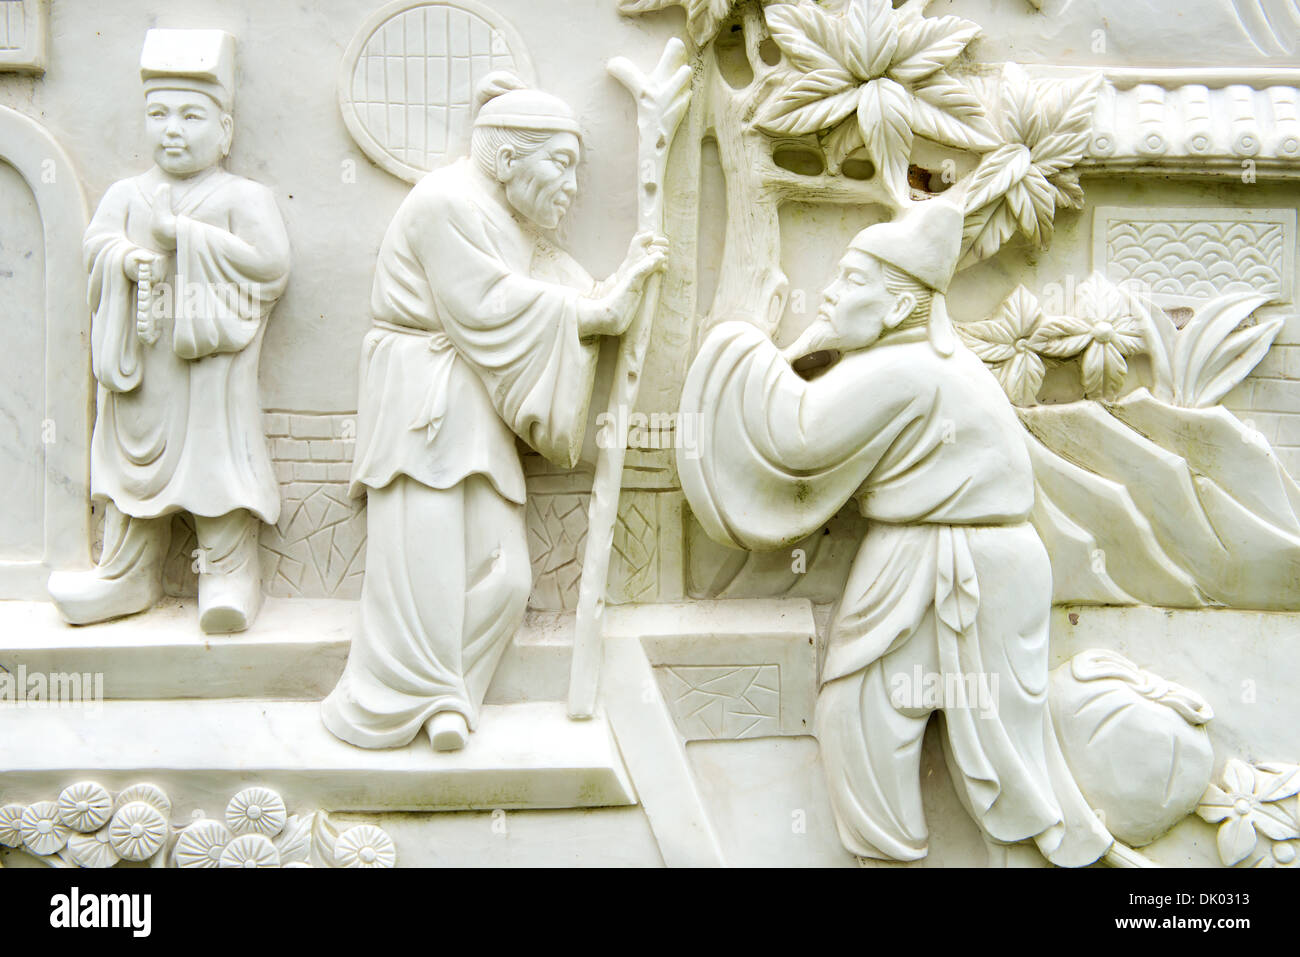 Chinese scholars carved on Chinese classical sculptures Stock Photo